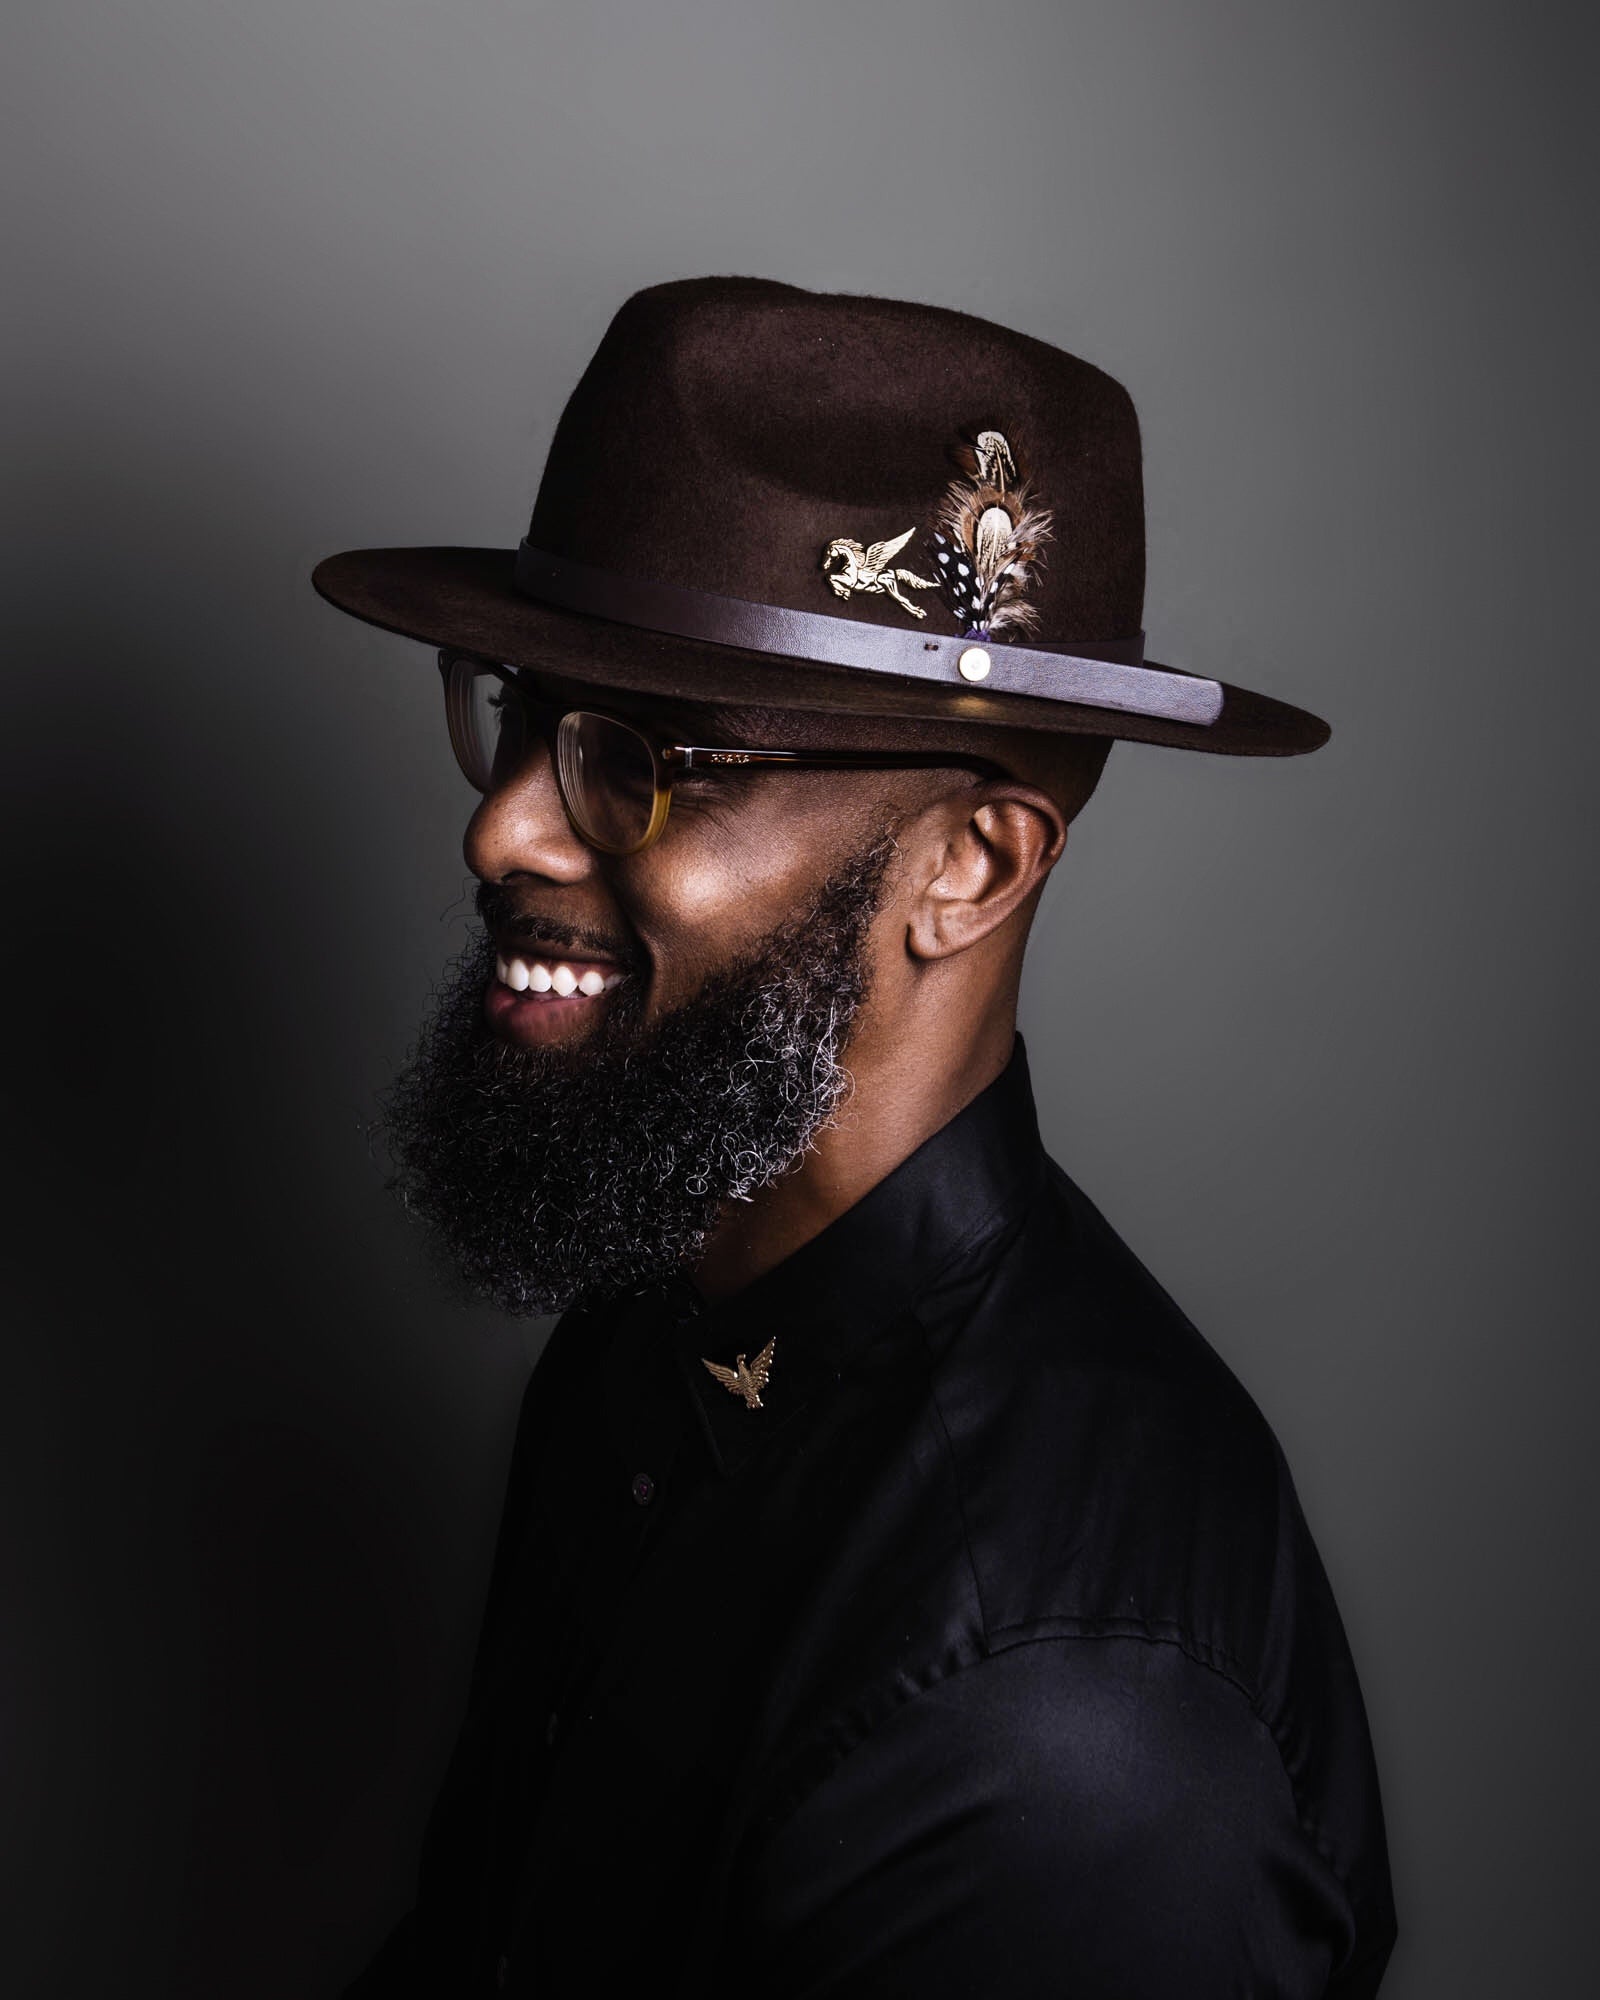 Issa Snack! 19 Beautiful Bearded Black Men Reveal What It’s Like Being In the #BeardGang